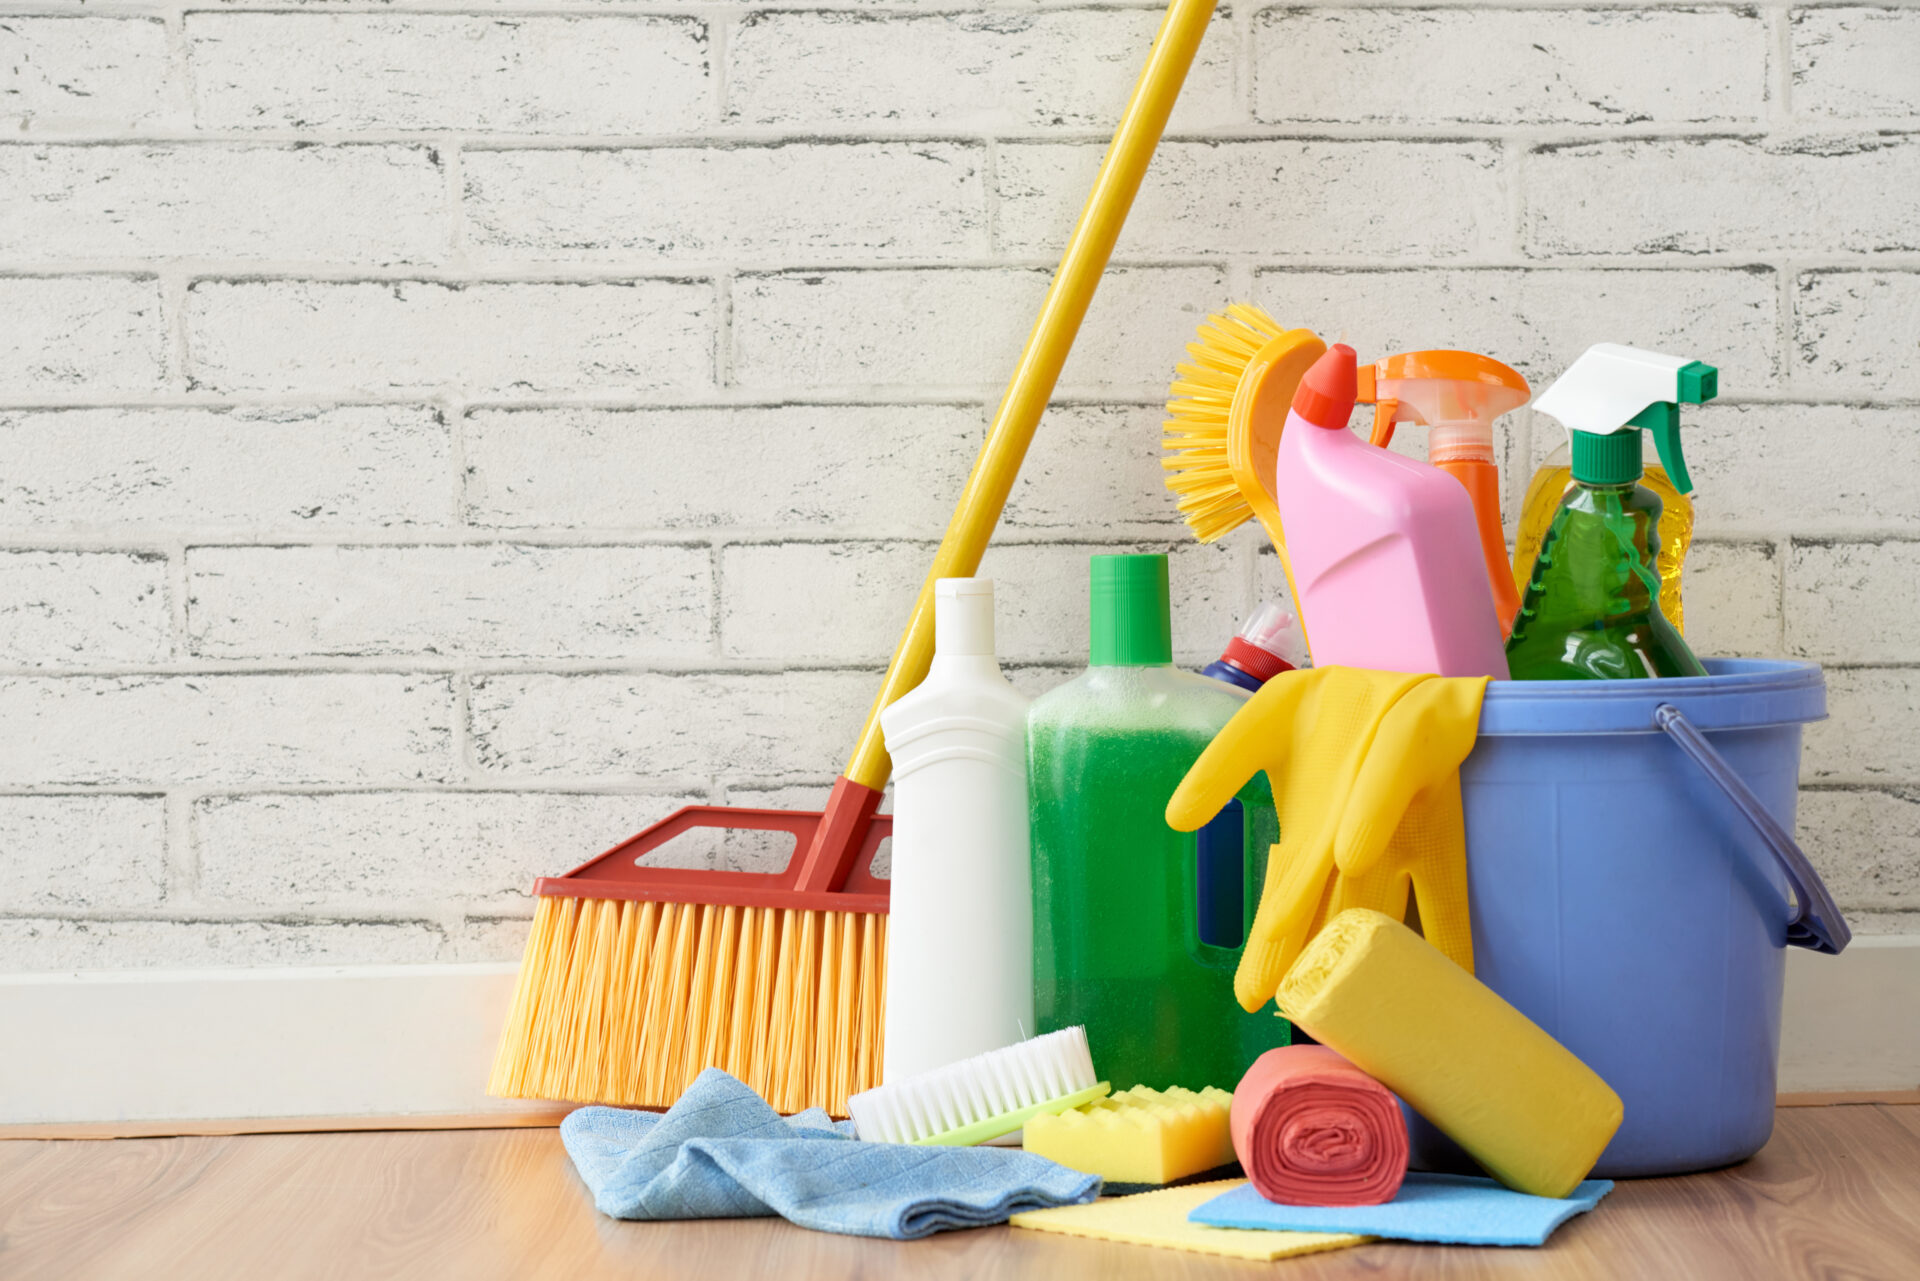 Brushes, cloths and detergents for spring cleaning